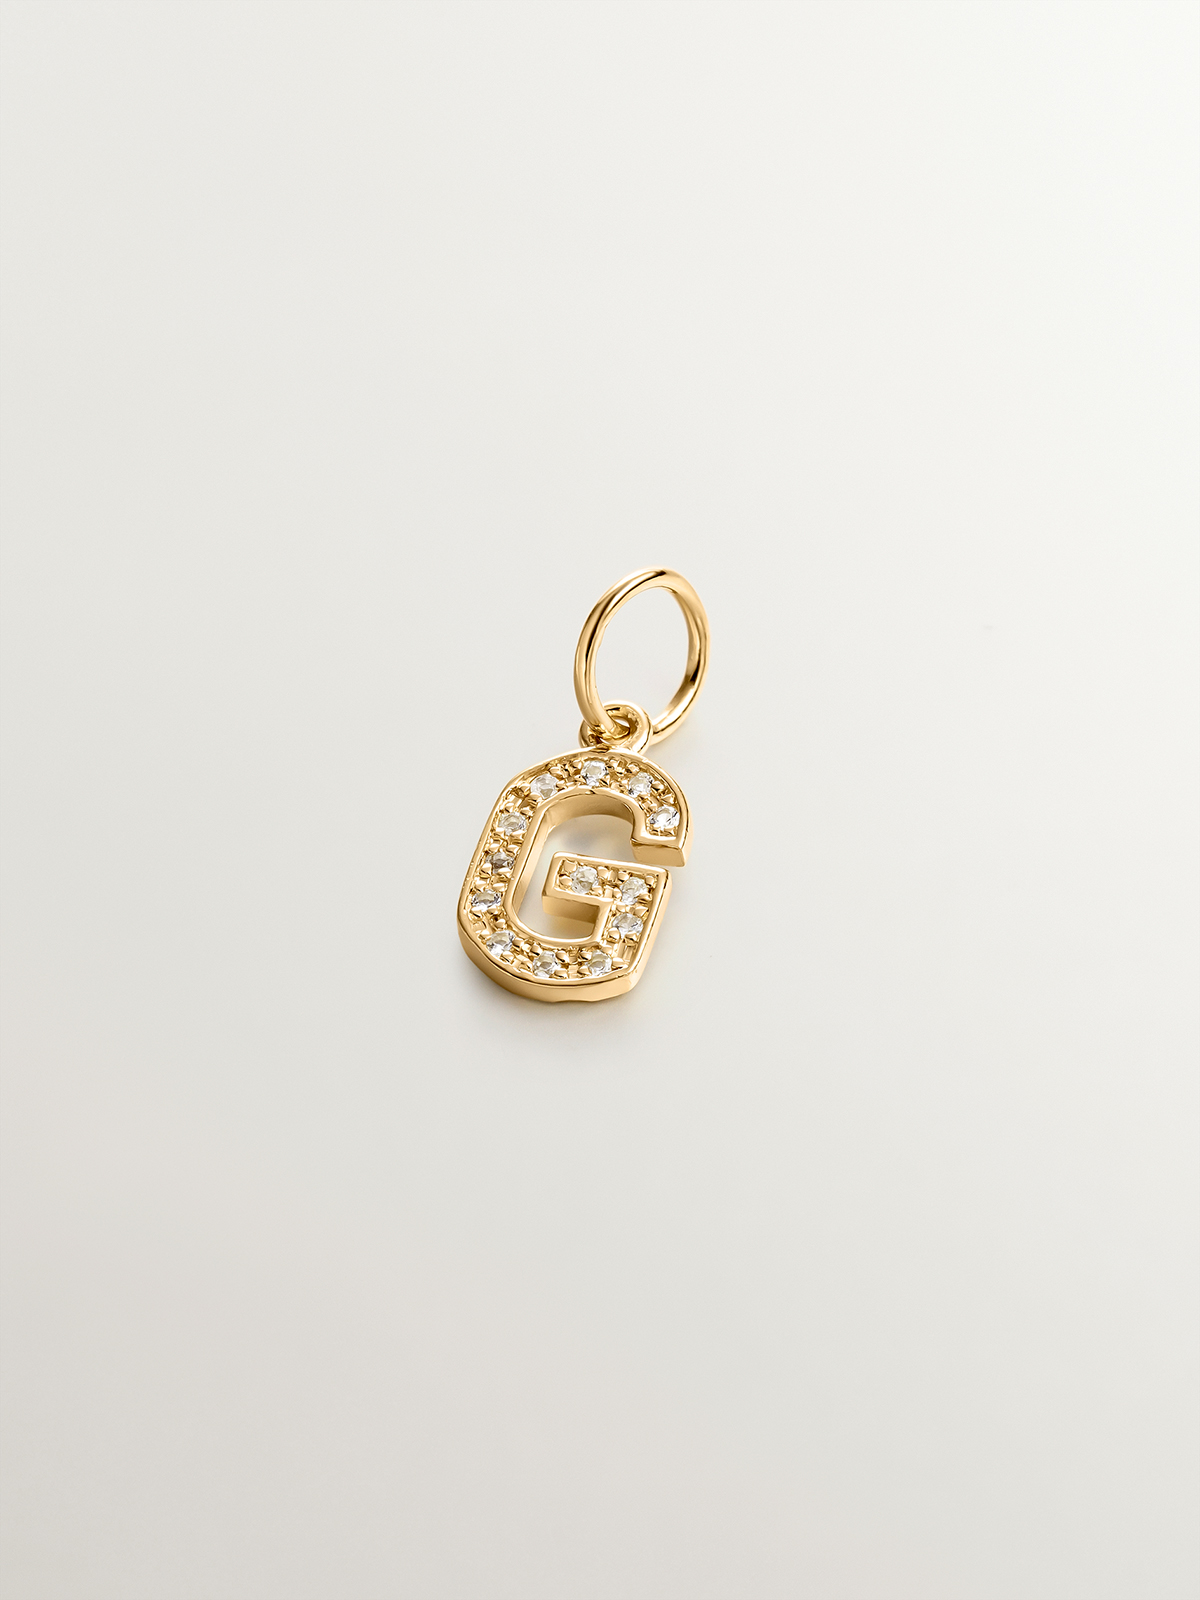 Charm made of 925 silver, bathed in 18K yellow gold and white topaz with the initial G.